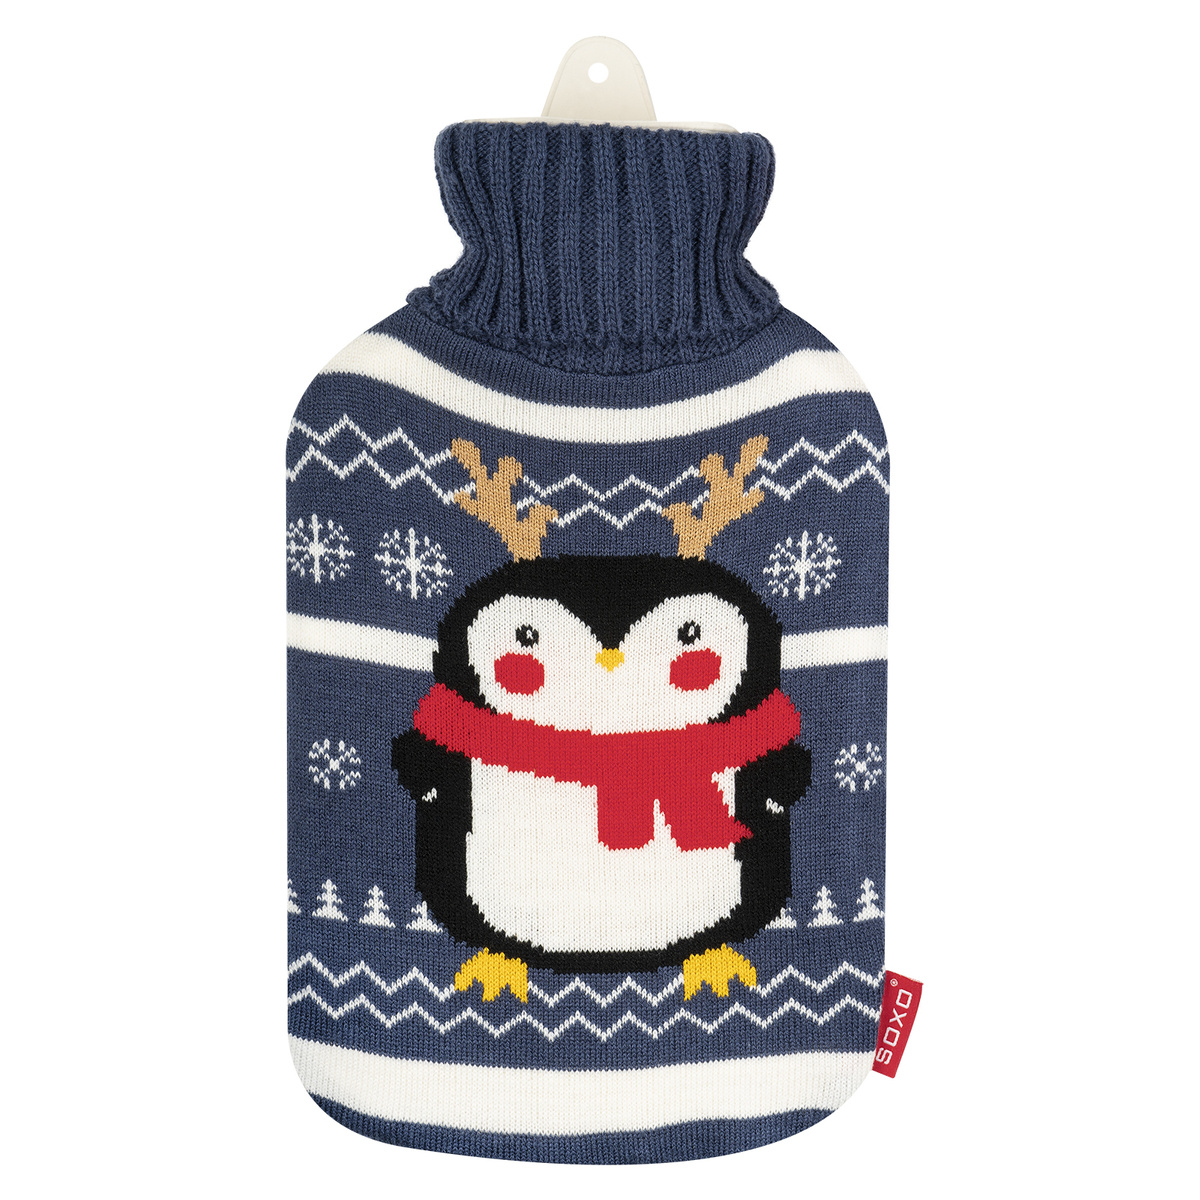 Hot water bottle Soxo penguin in sweater funny gift Santa Claus | Christmas  - 13,99 € | online shop SOXO